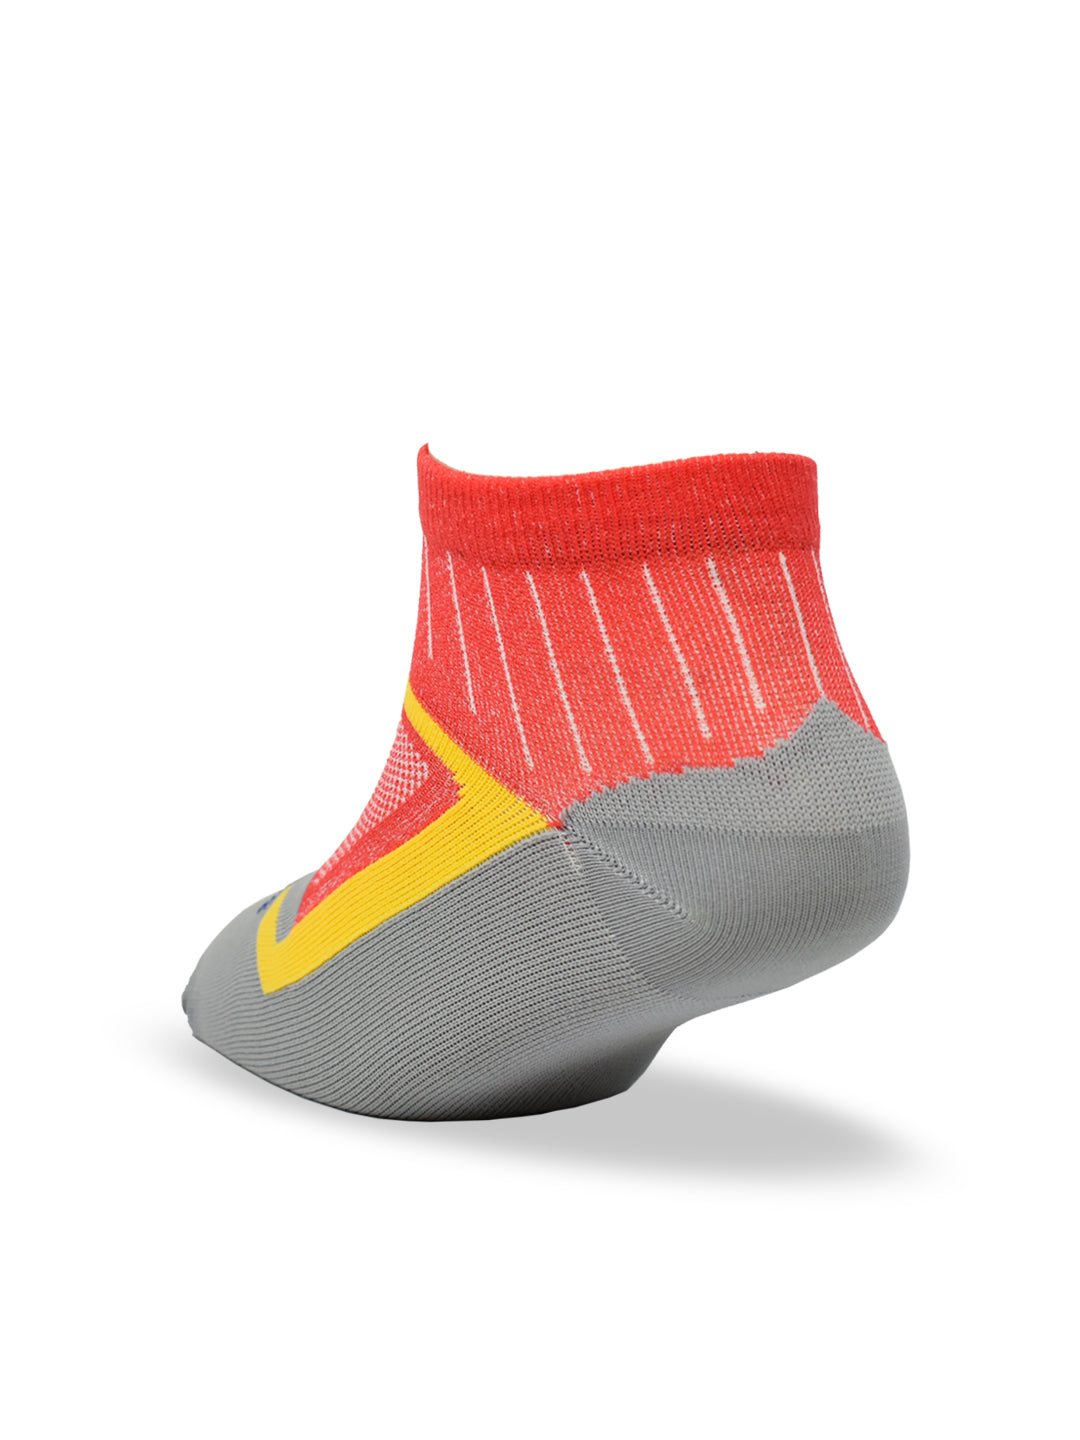 Young Wings Anti-Bacterial Dri-Fit Ankle Length Running Socks - Pack of 3 Pairs, Colour: Red/Grey